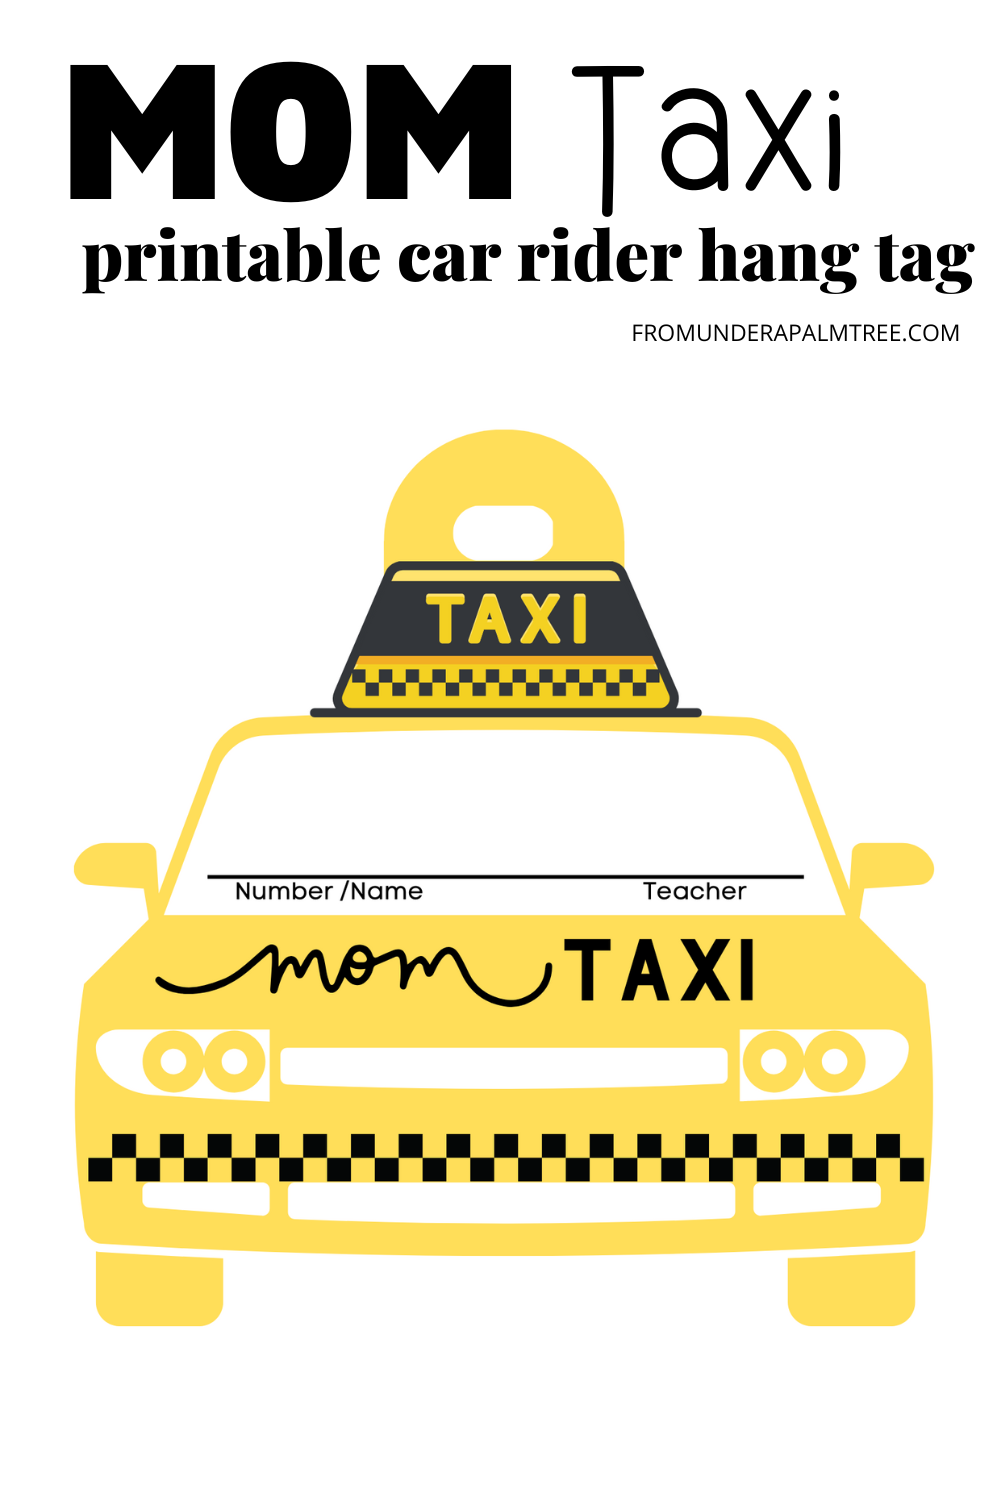 Printable Car Rider Hang Tag From Under A Palm Tree